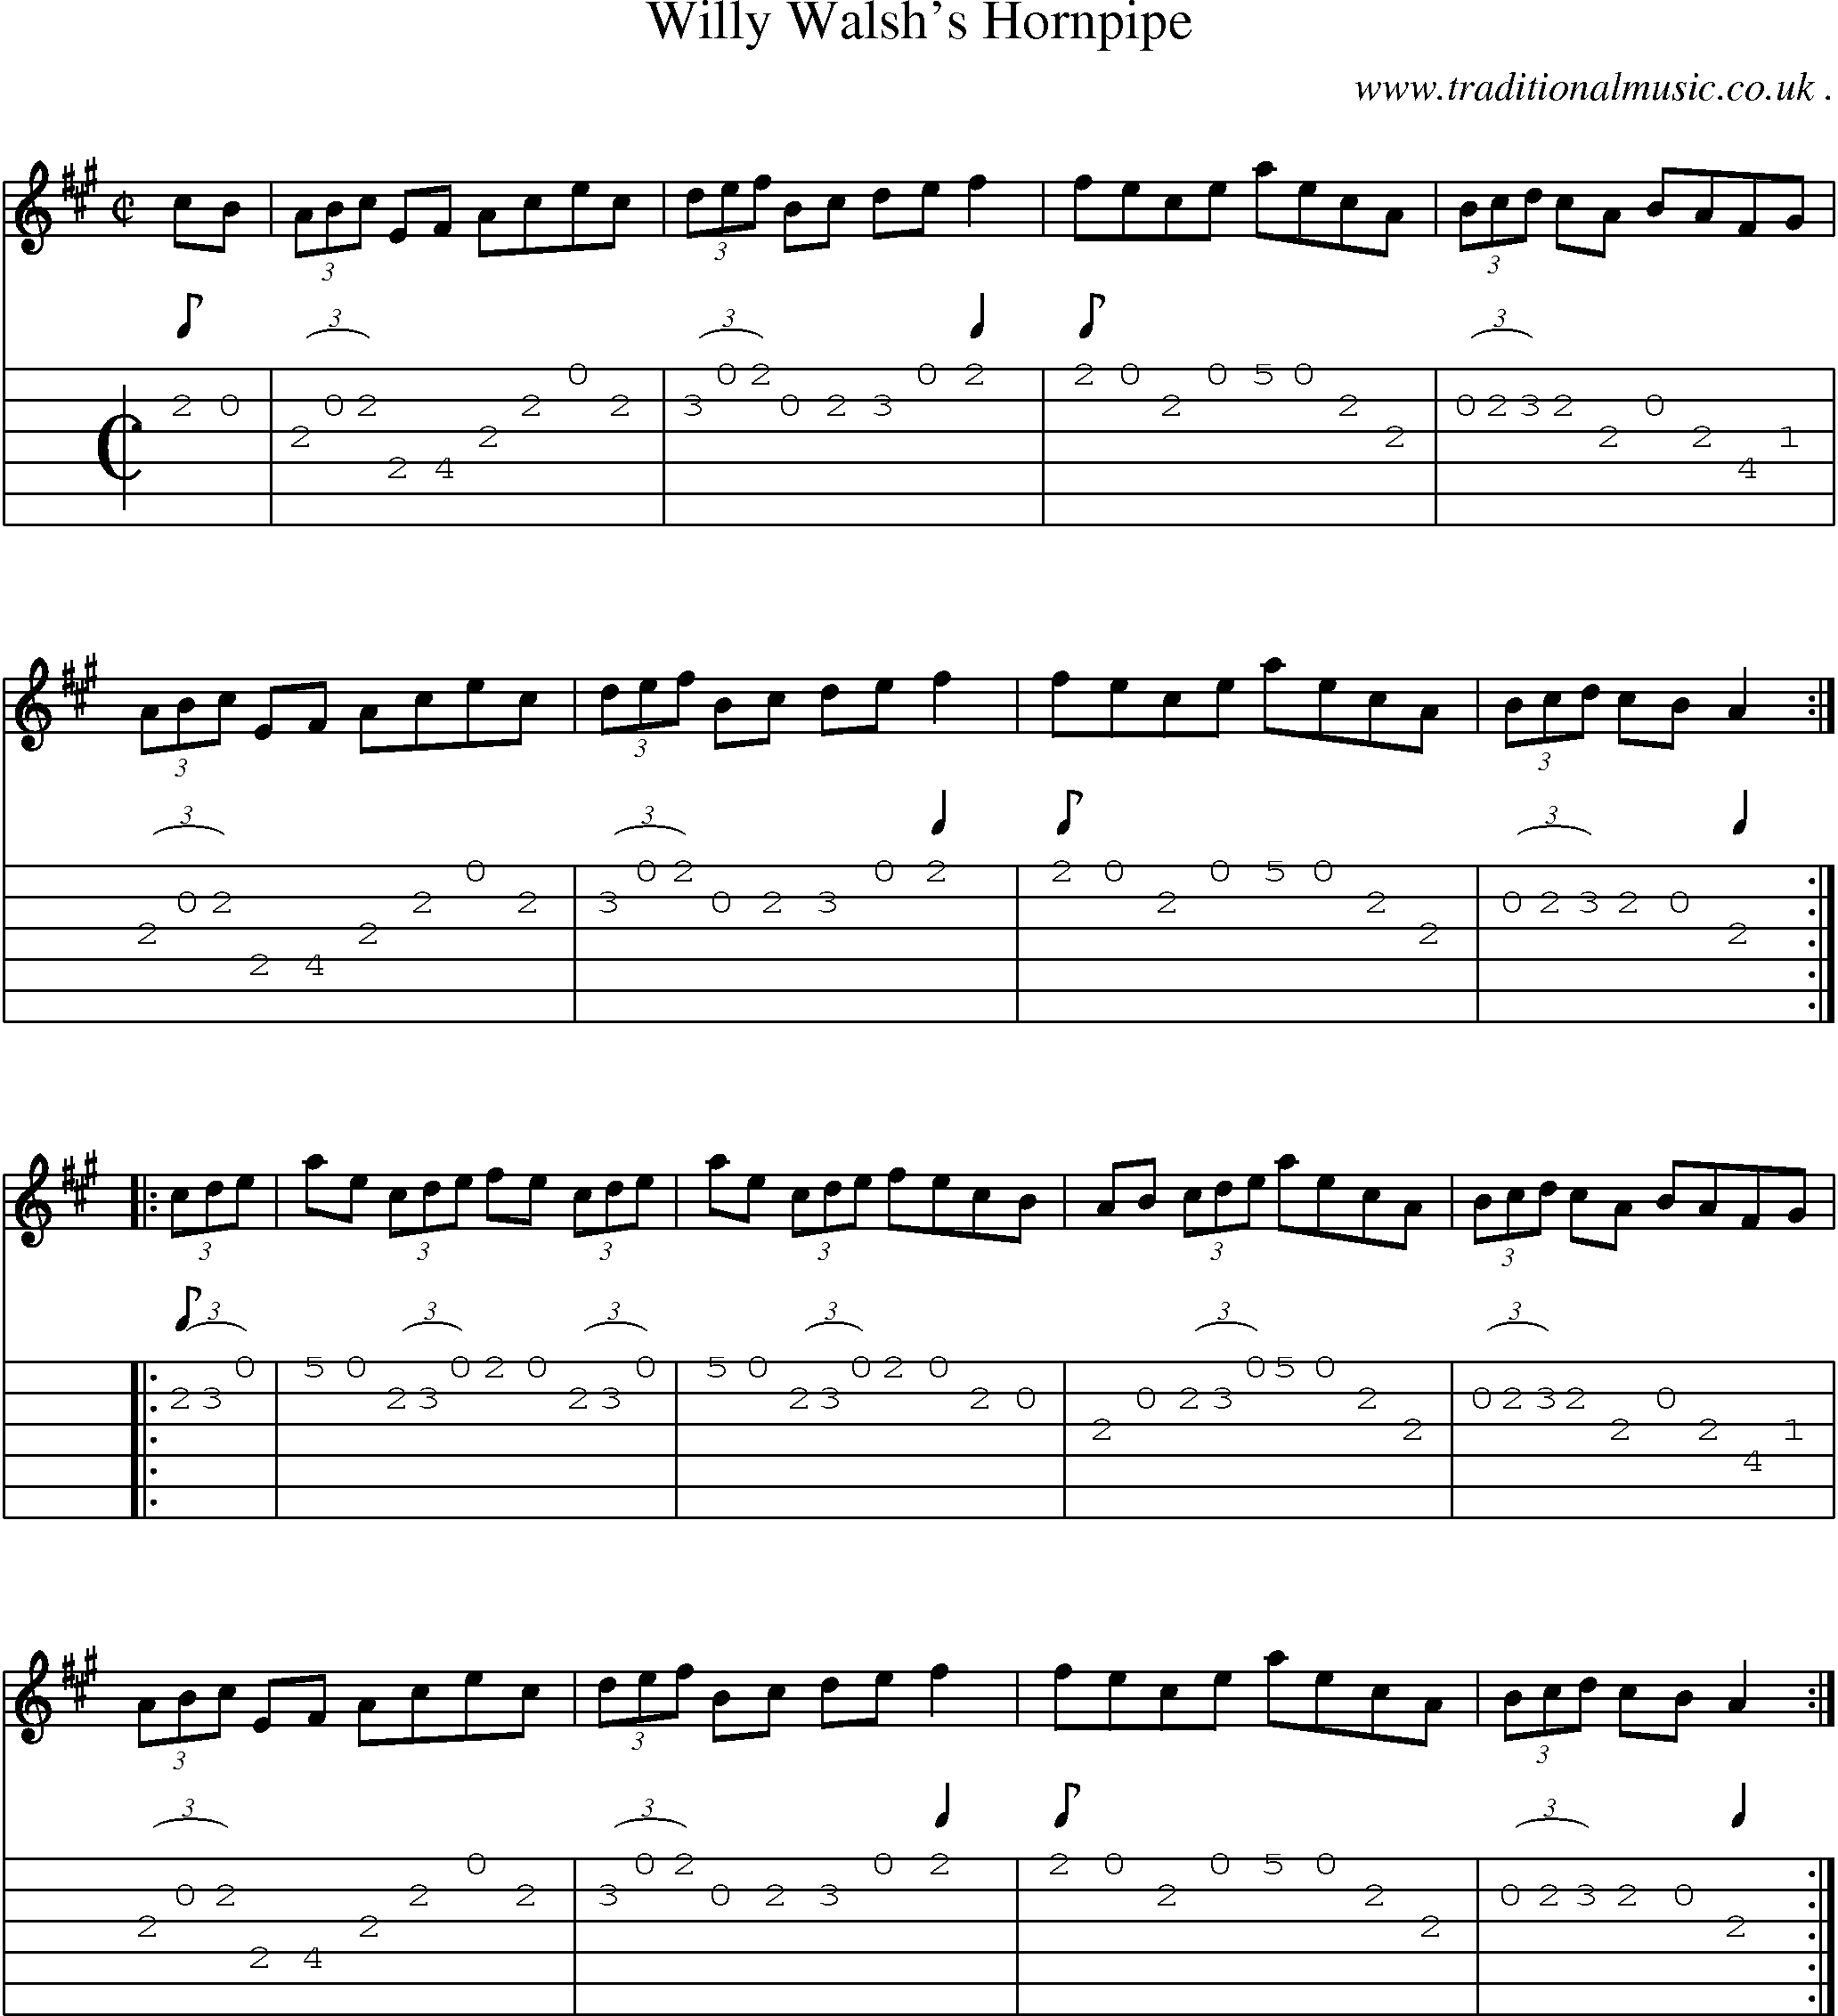 Sheet-Music and Guitar Tabs for Willy Walshs Hornpipe